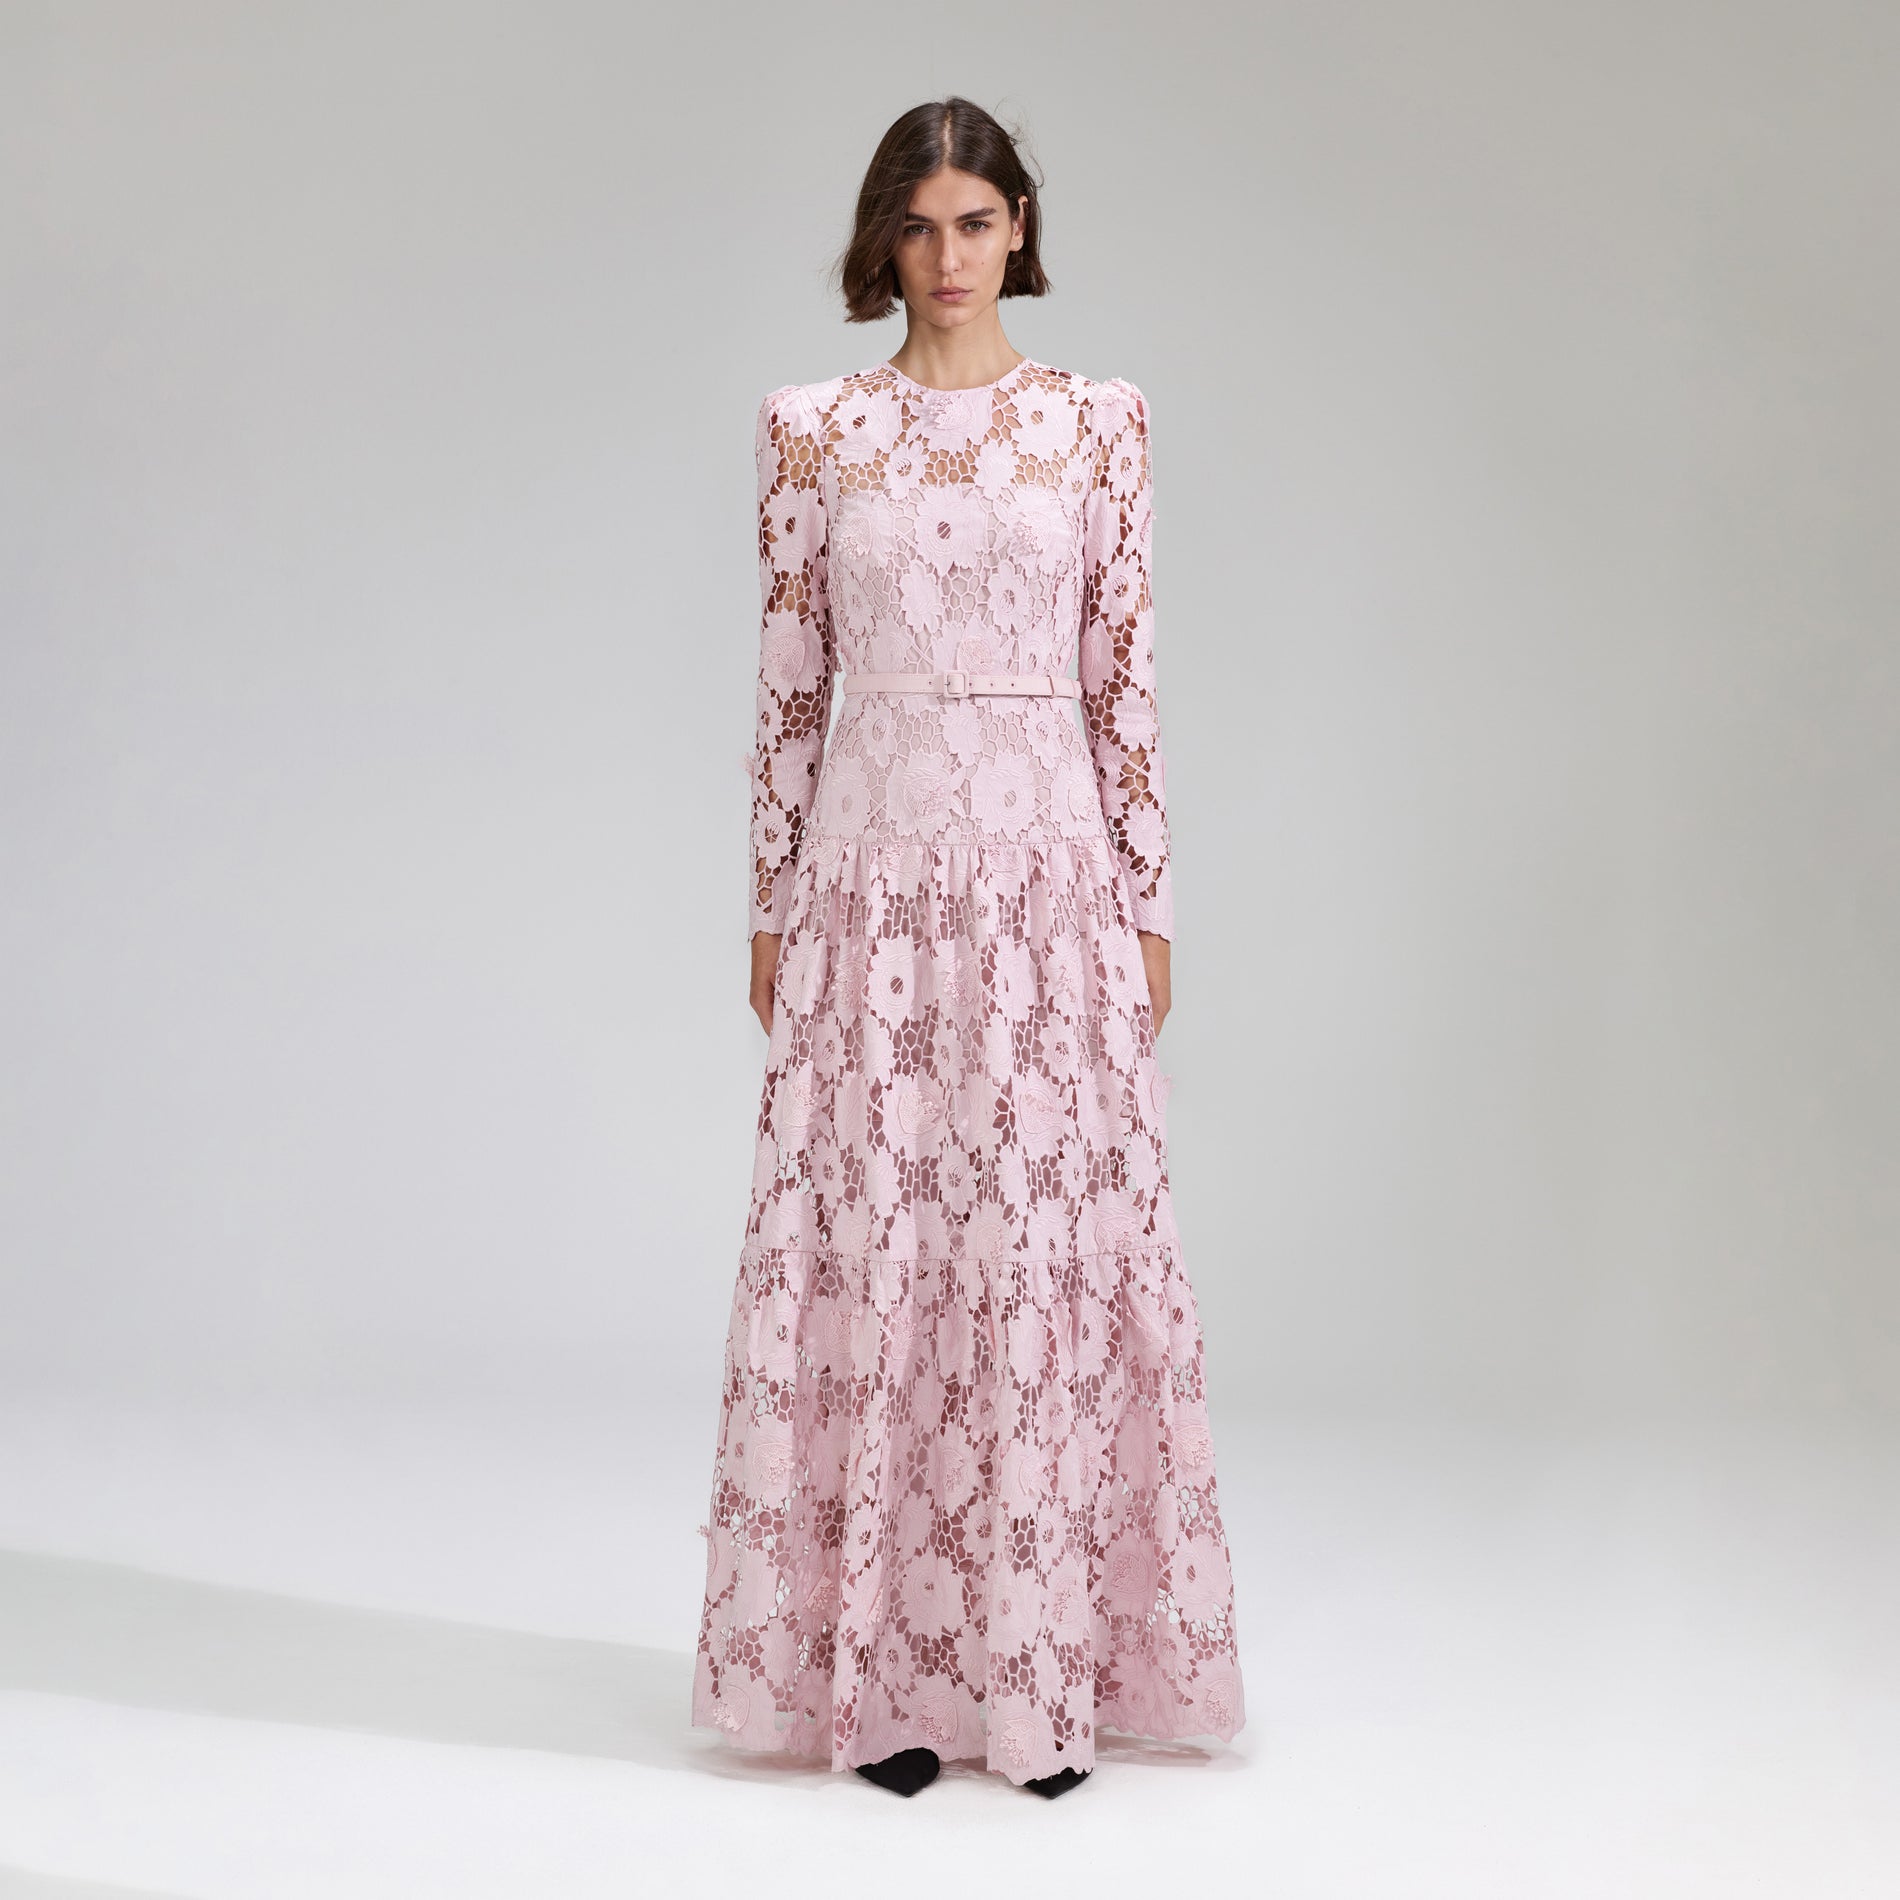 A woman wearing the Pink 3D Cotton Lace Maxi Dress